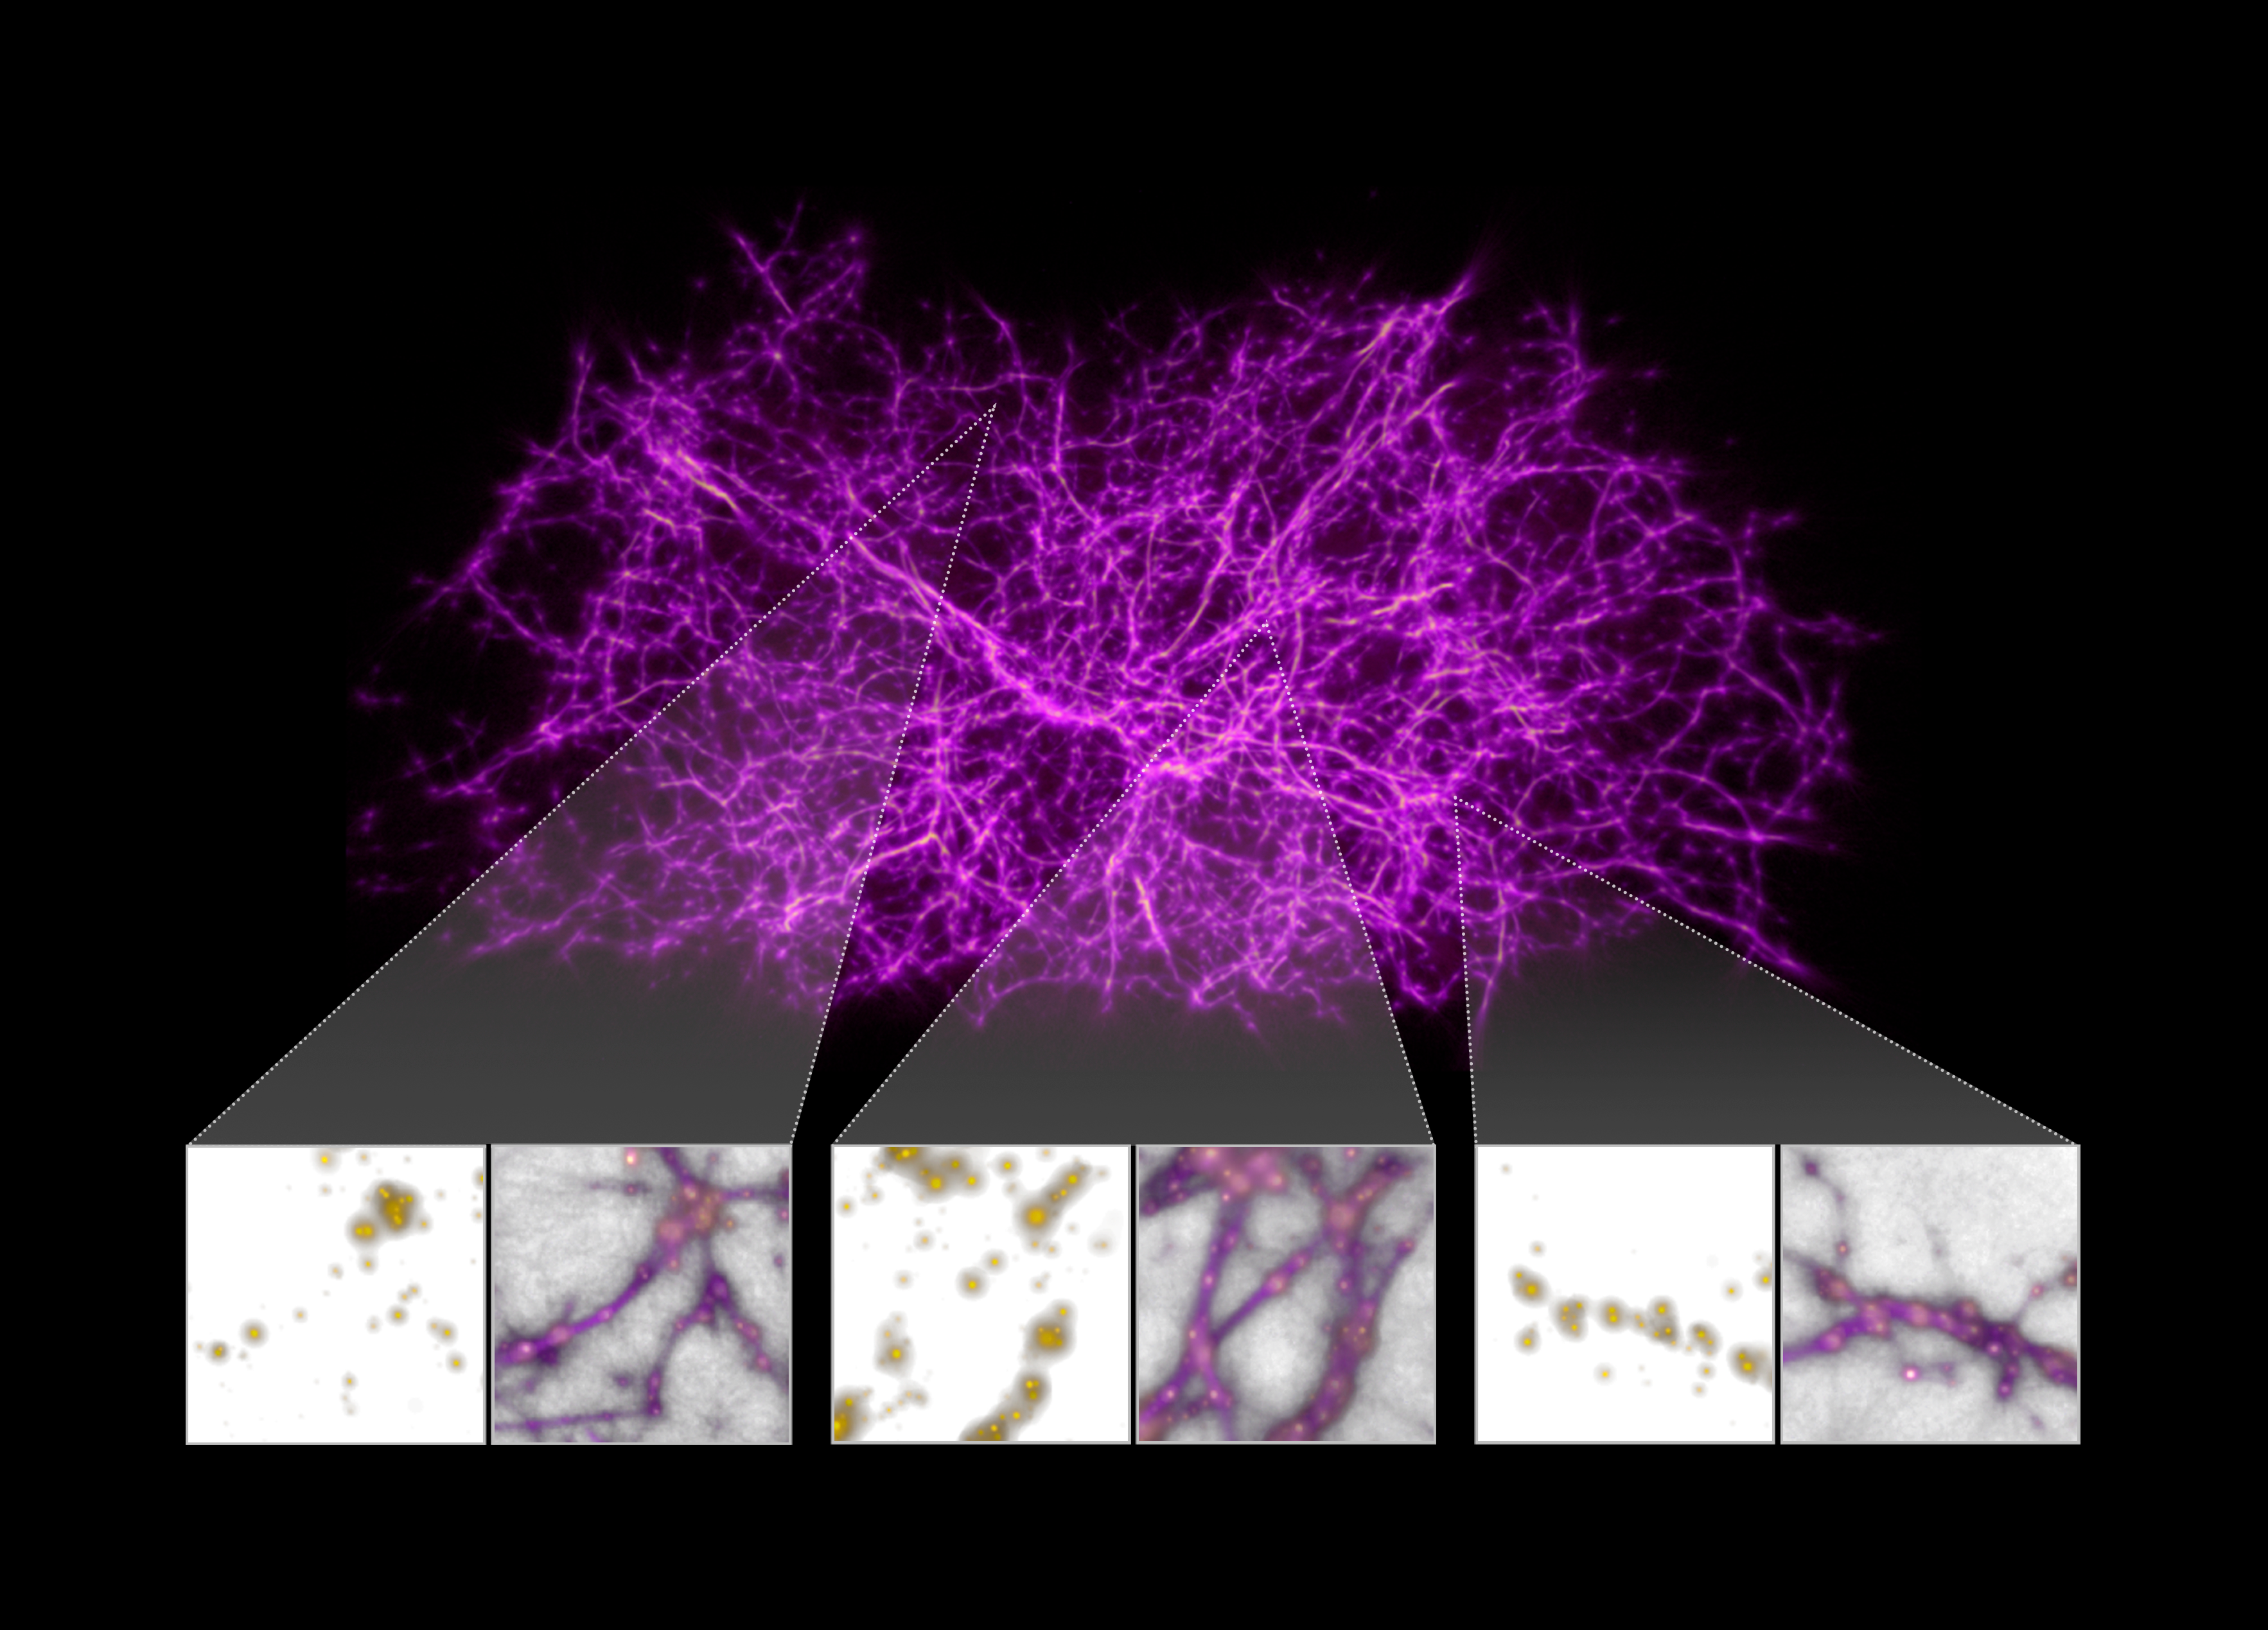 Illustration: Purple filaments fill the view against a black background. They represent the growth of slime mold.